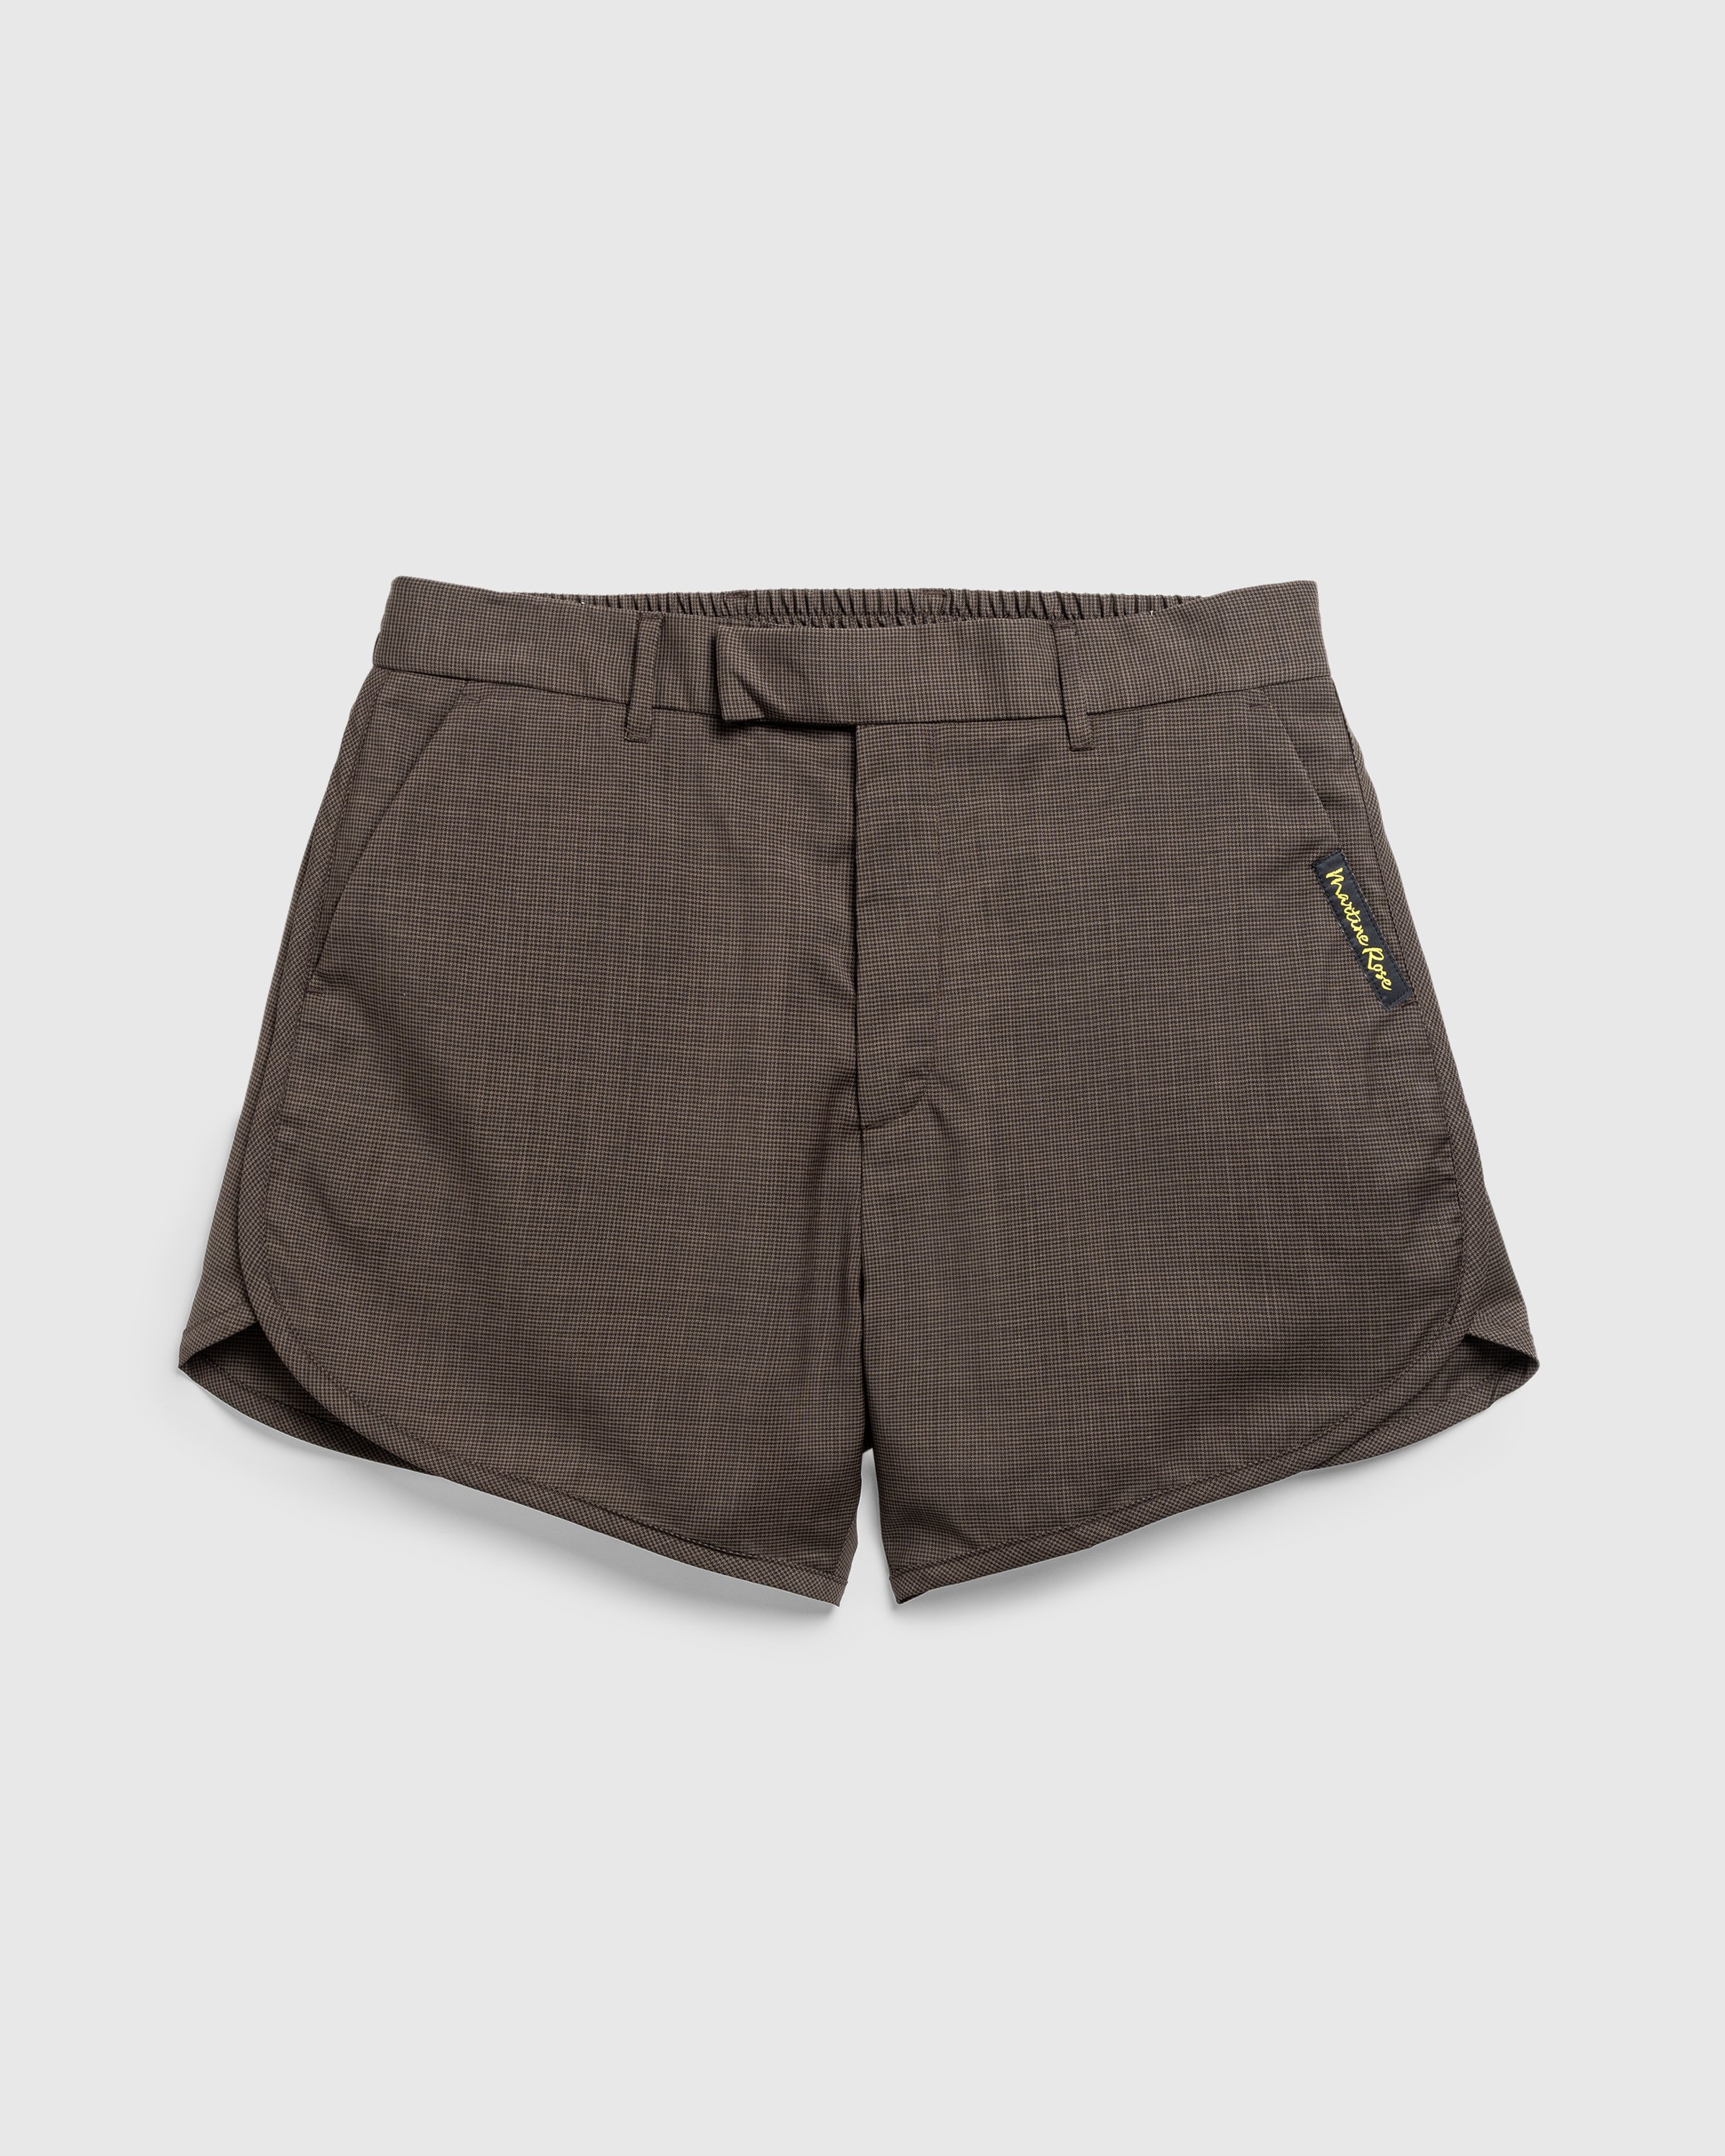 Martine Rose - Tailored Gym Short Brown Houndstooth - Clothing - Brown - Image 1